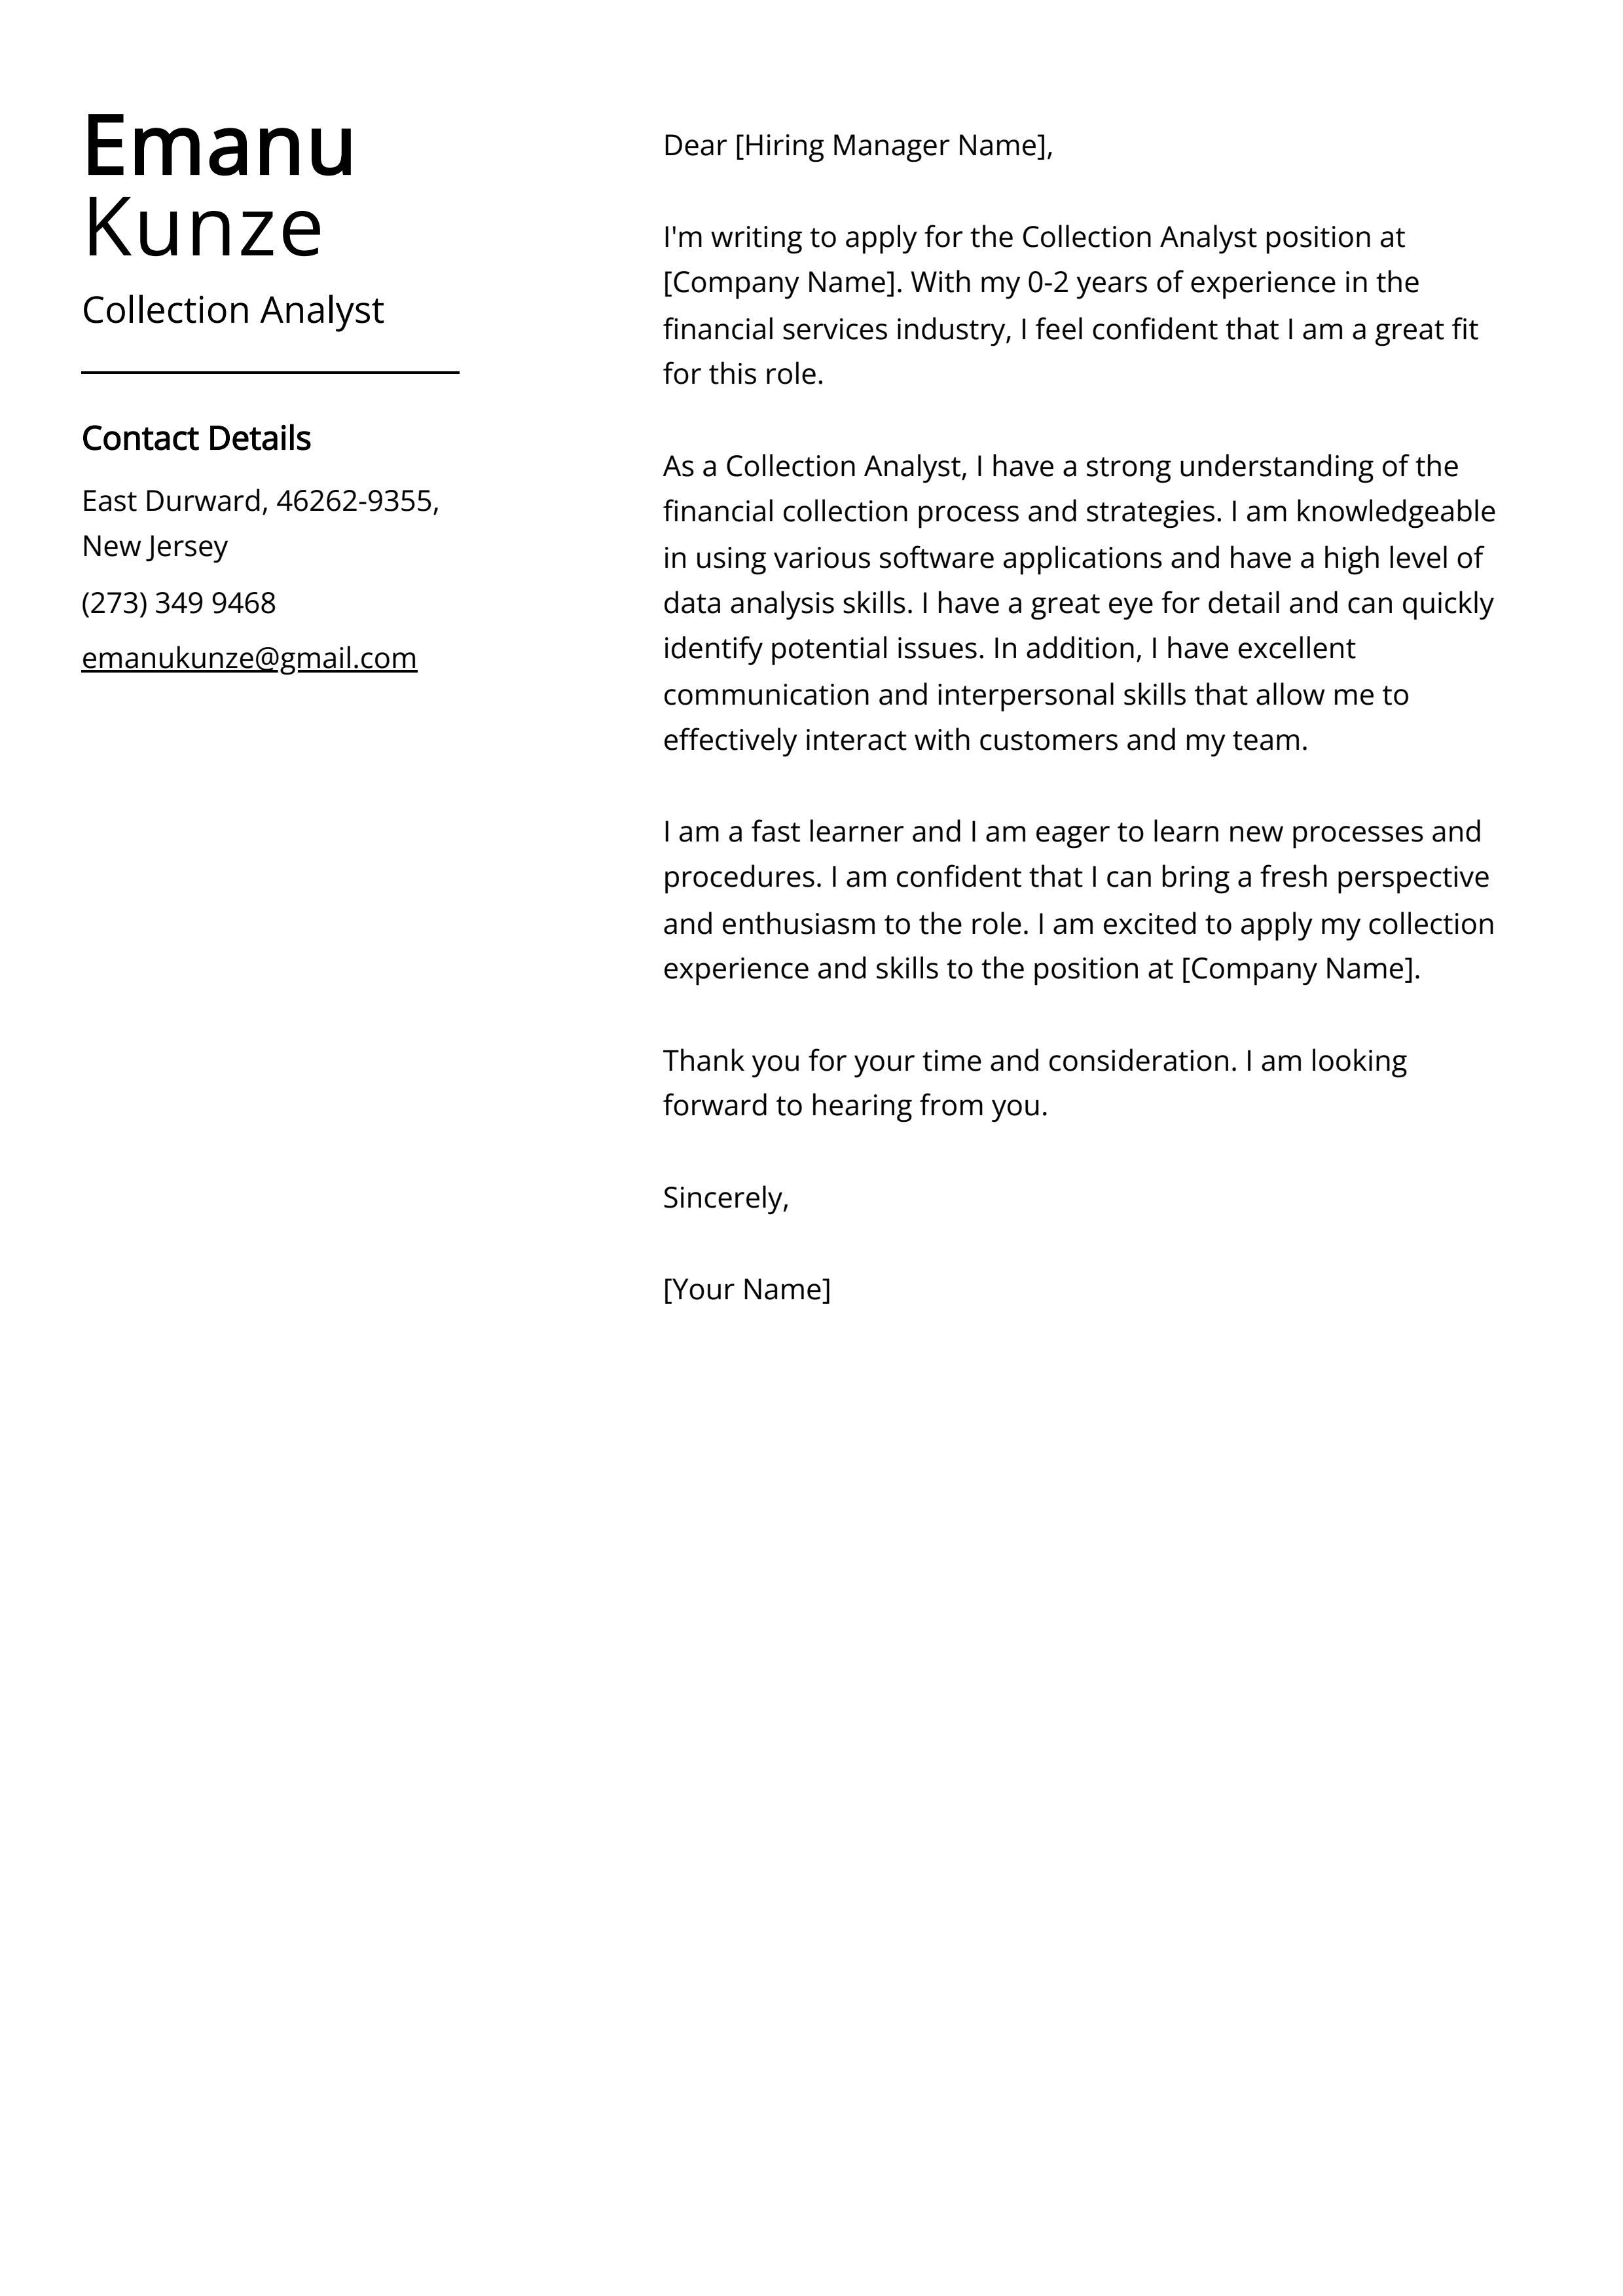 Collection Analyst Cover Letter Example